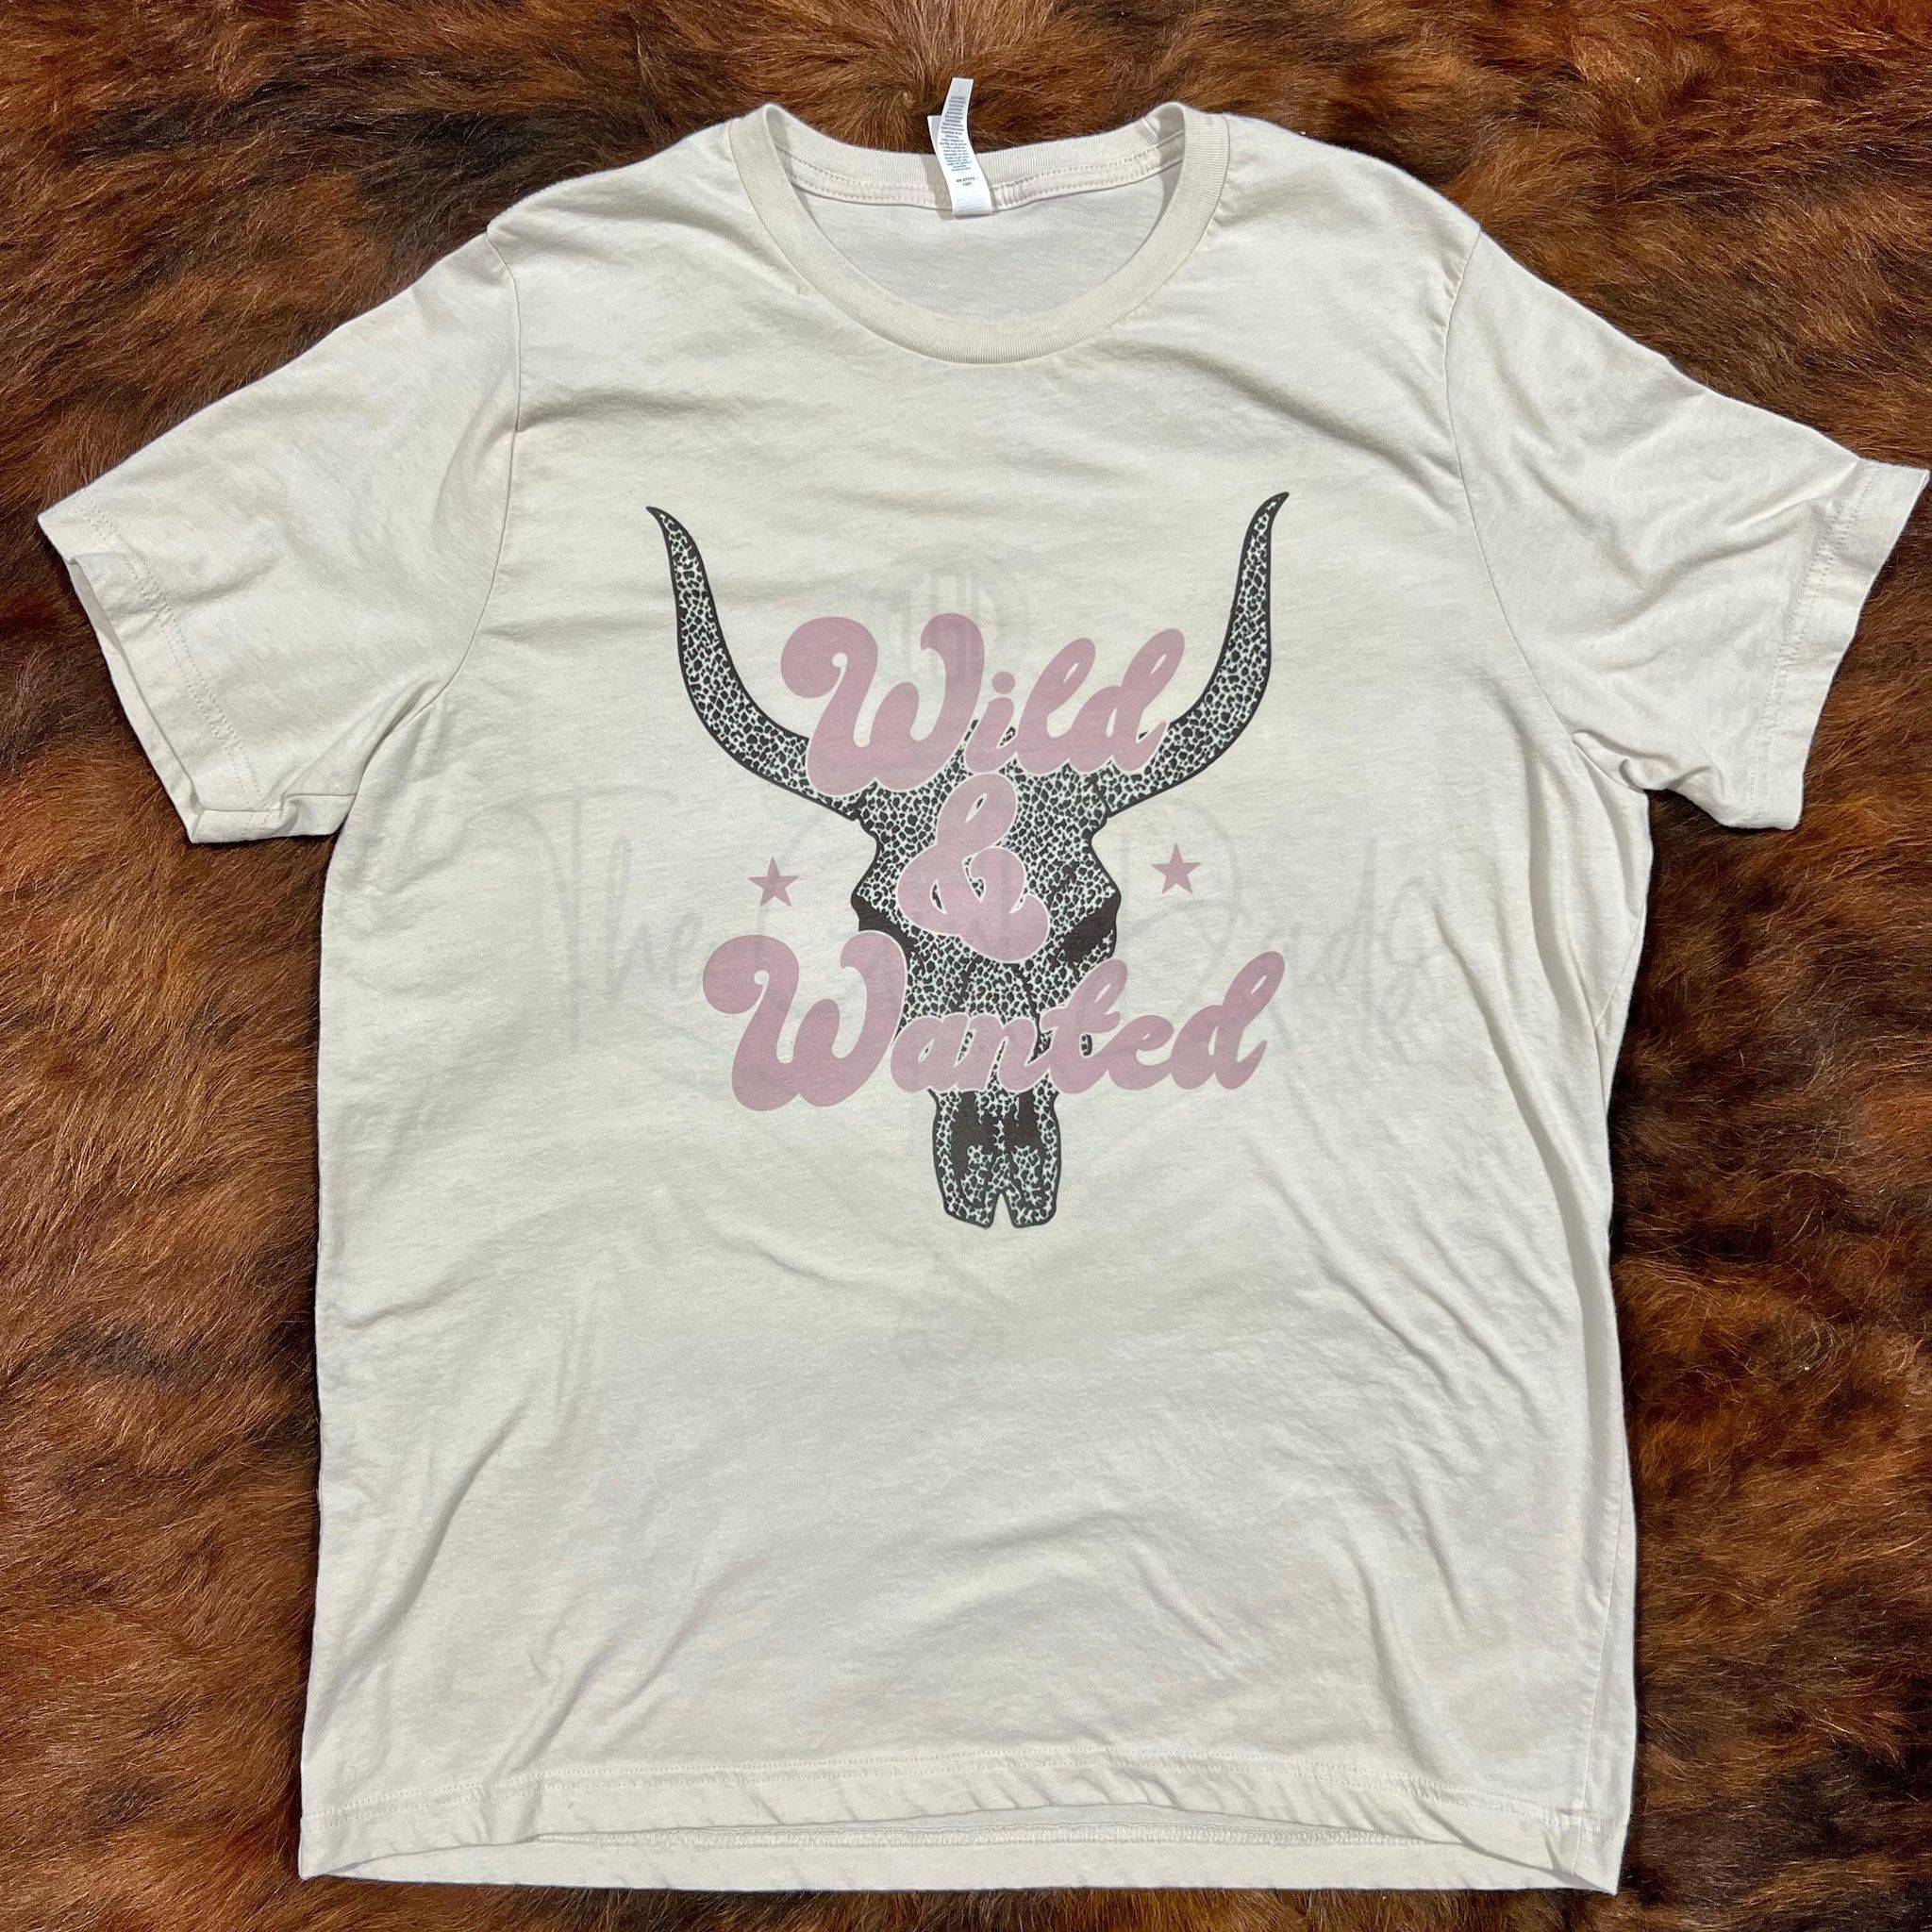 Wild & Wanted Top Design